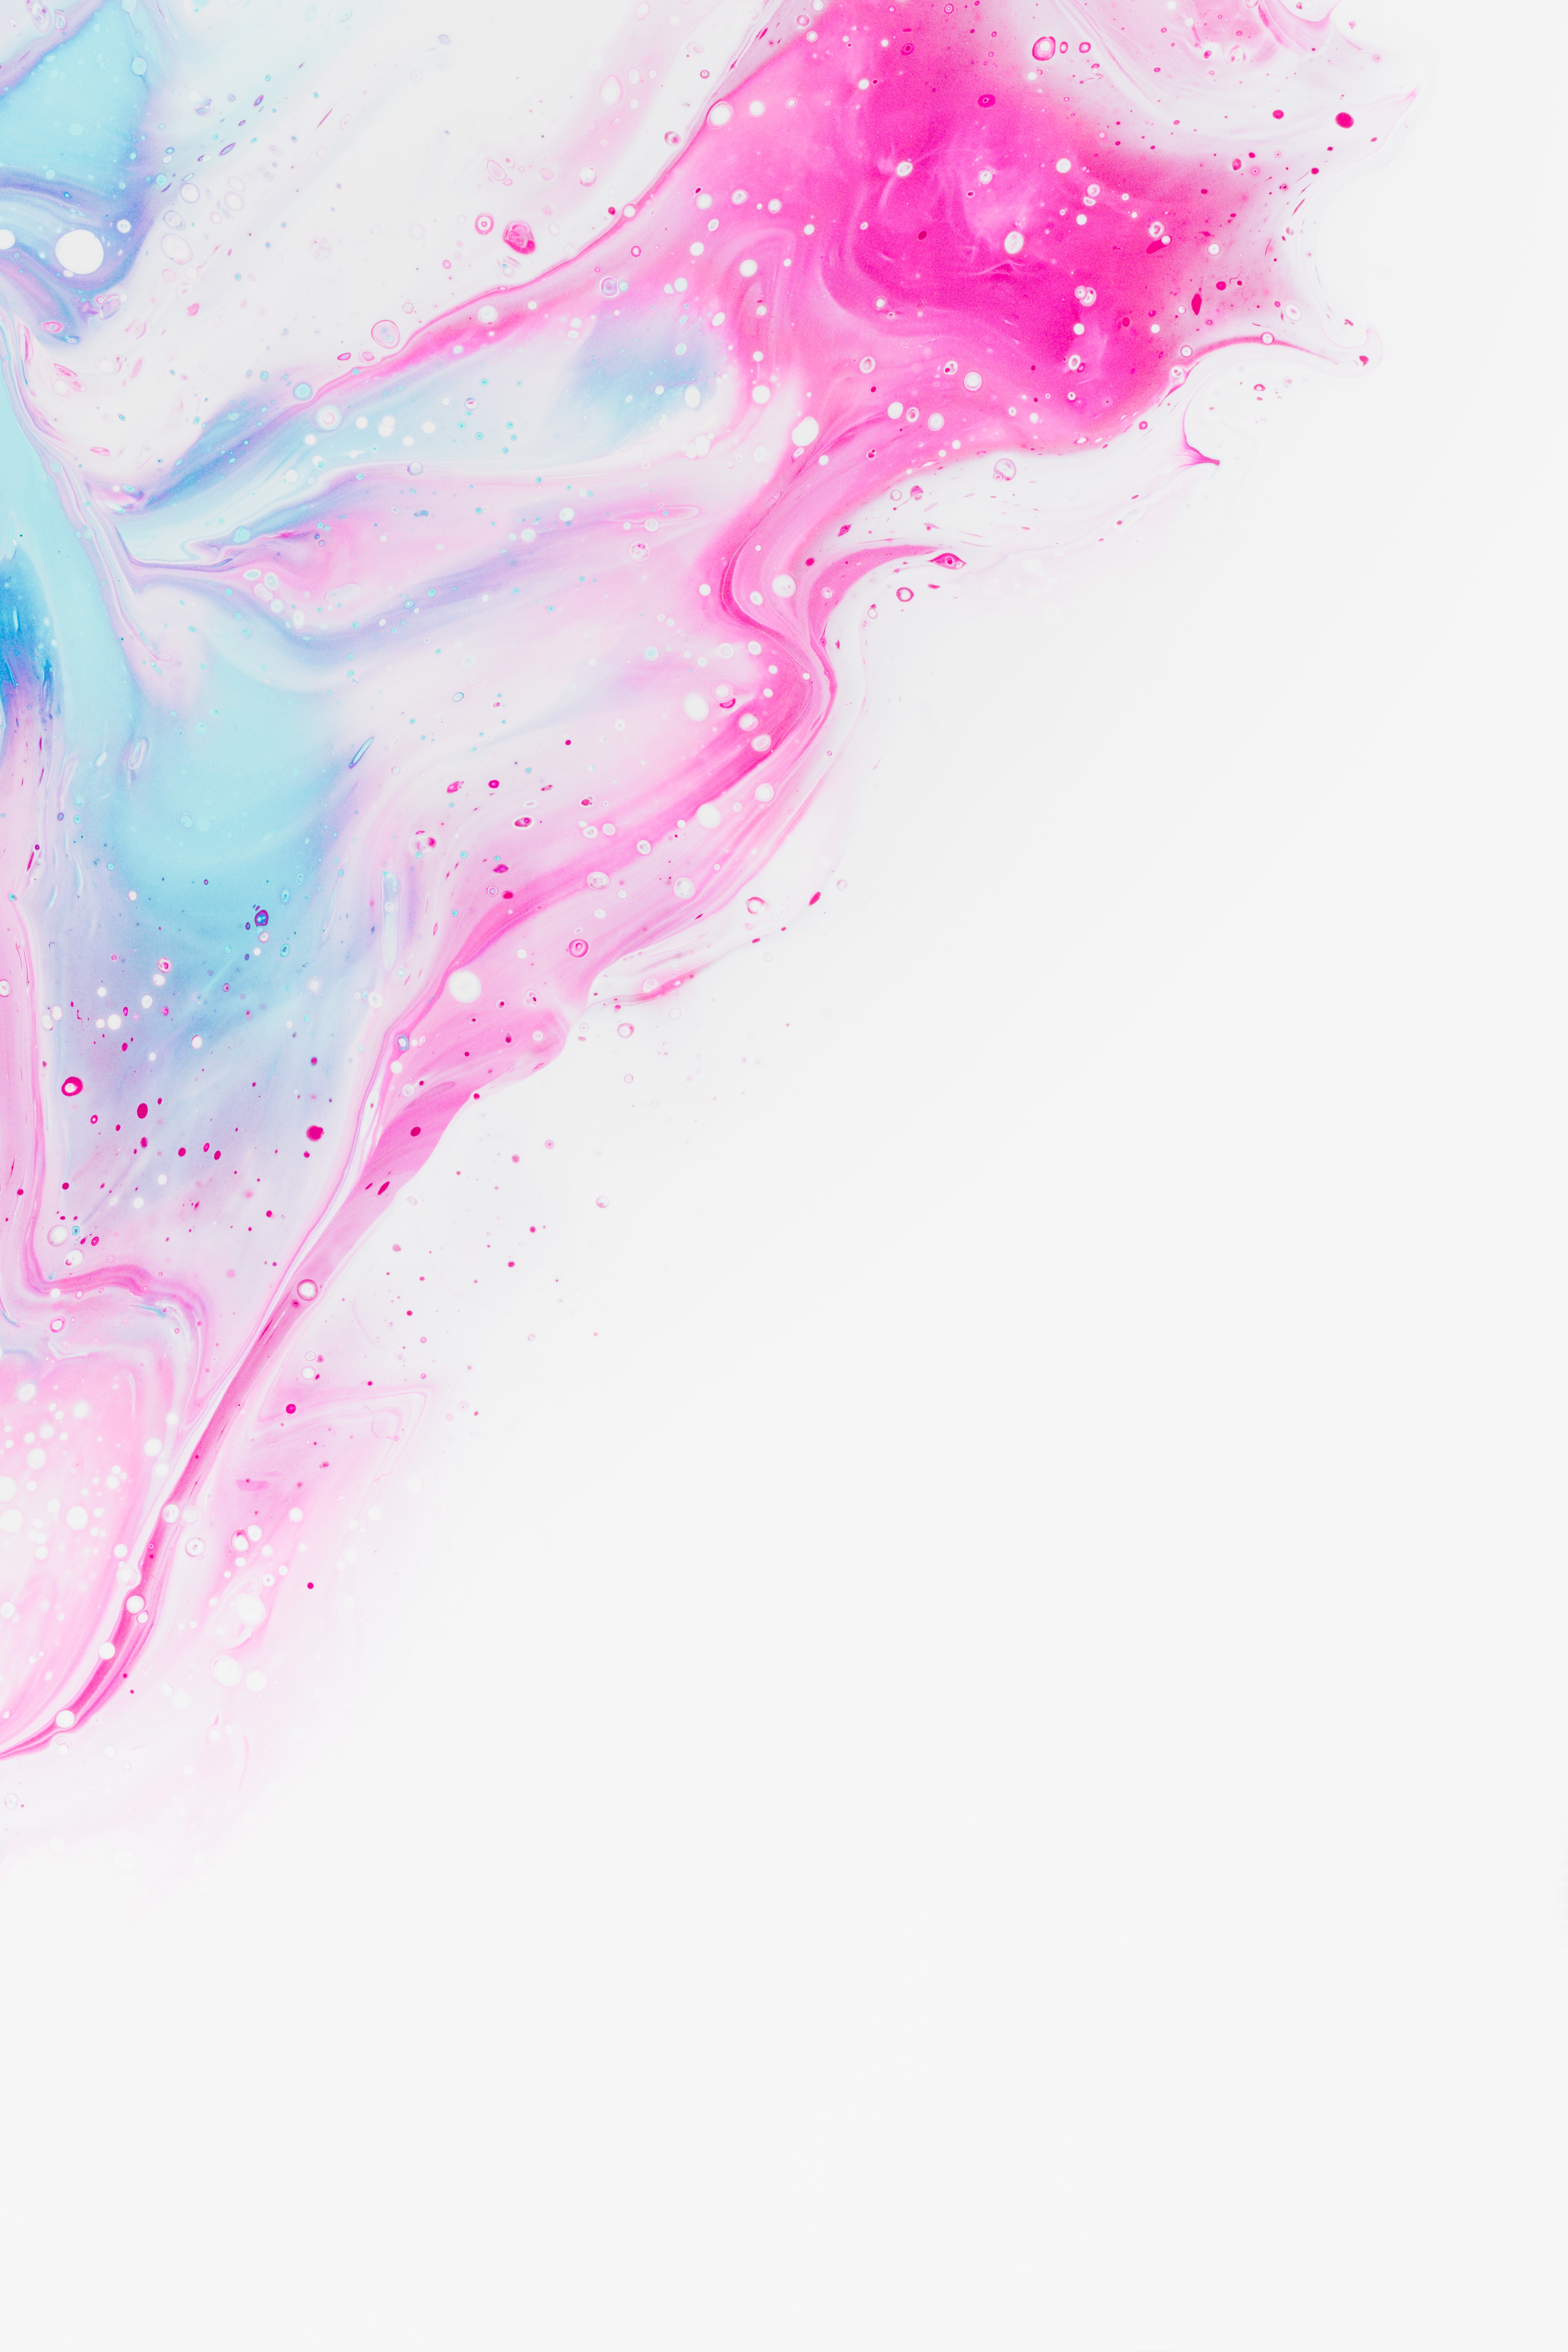 108943 download wallpaper abstract, bubbles, divorces, paint, liquid, colors, color, mixing screensavers and pictures for free